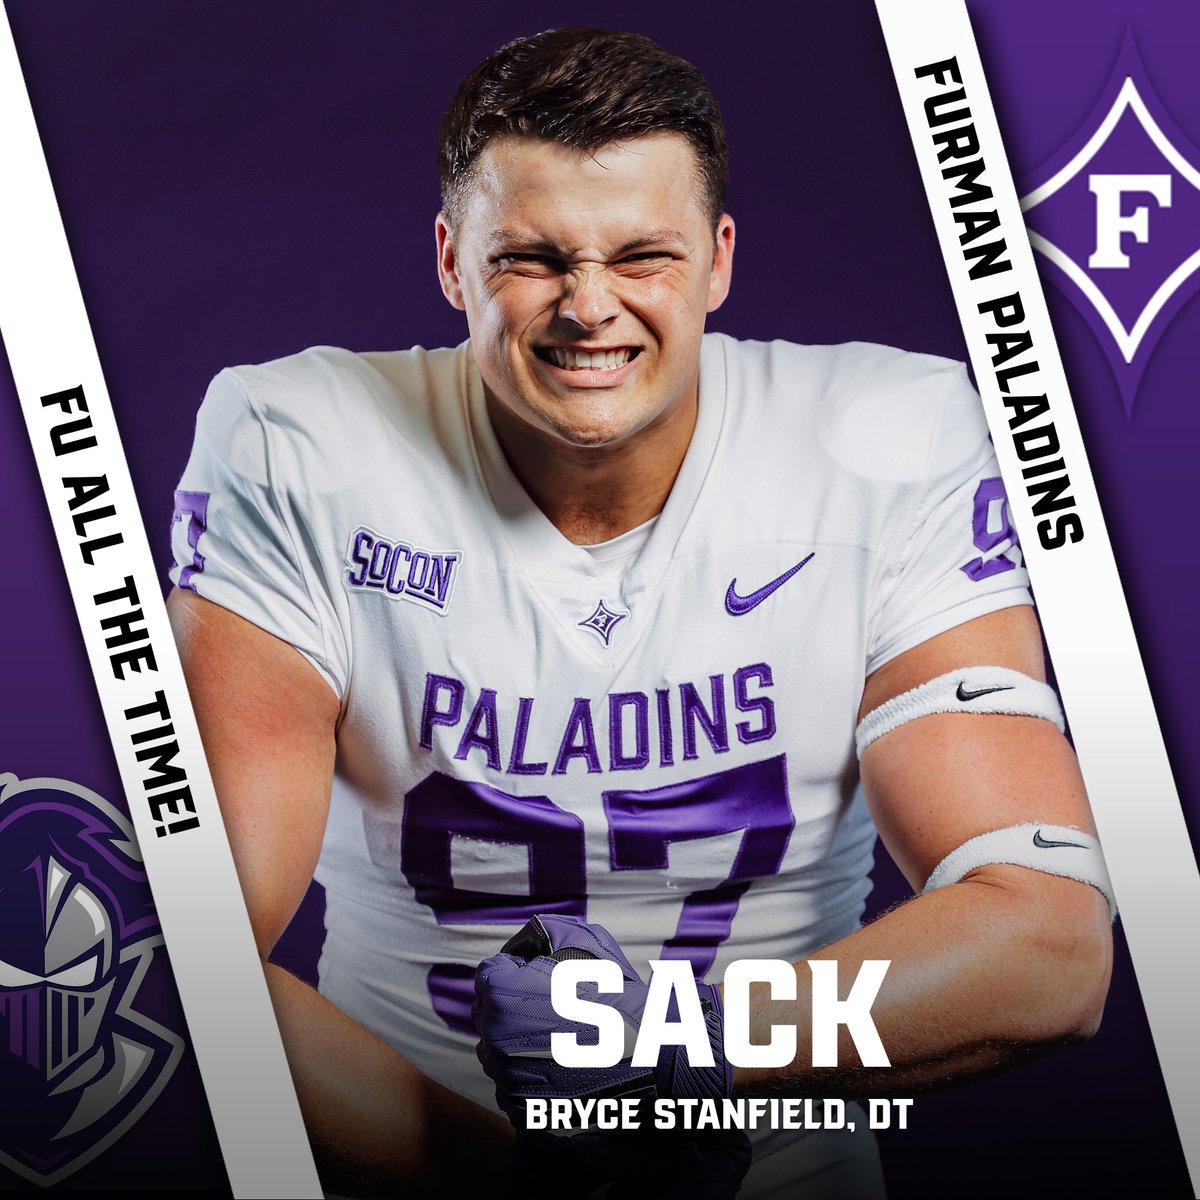 Jack Barton, Bryce Stanfield combine on a third down sack, forcing a Mercer punt!